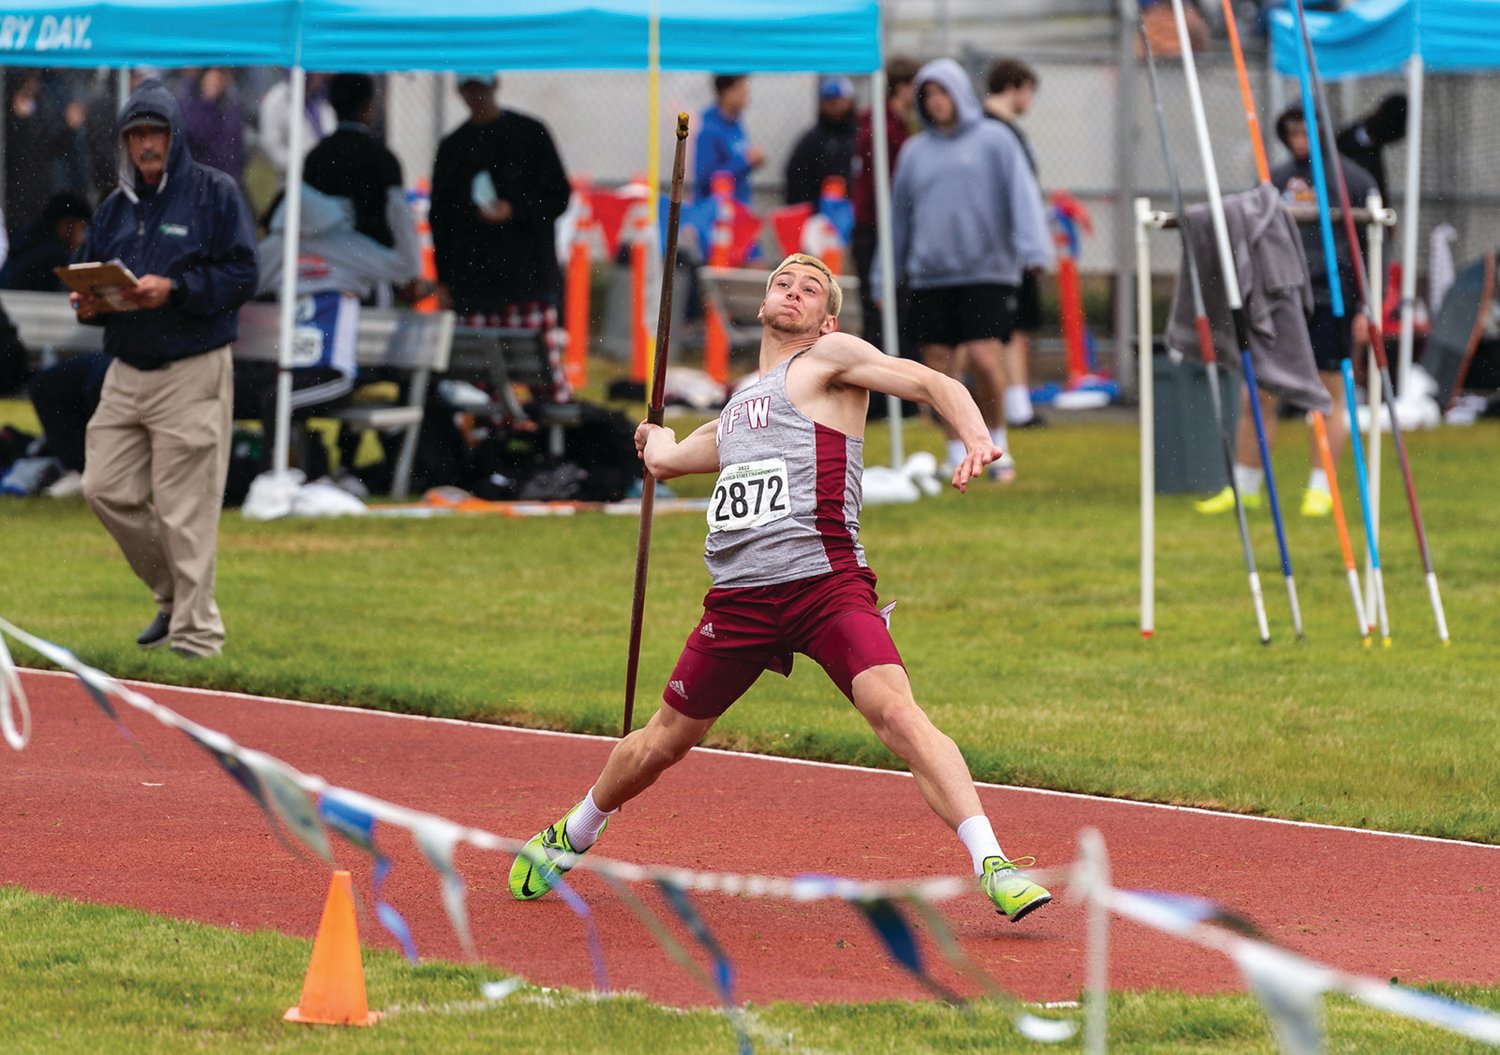 W.F. West's Seth Hoff launches a javelin in the 2A Boys Javelin at the 4A/3A/2A State Track and Field Championships on Saturday, May 28, 2022, at Mount Tahoma High School in Tacoma. (Joshua Hart/For The Chronicle)